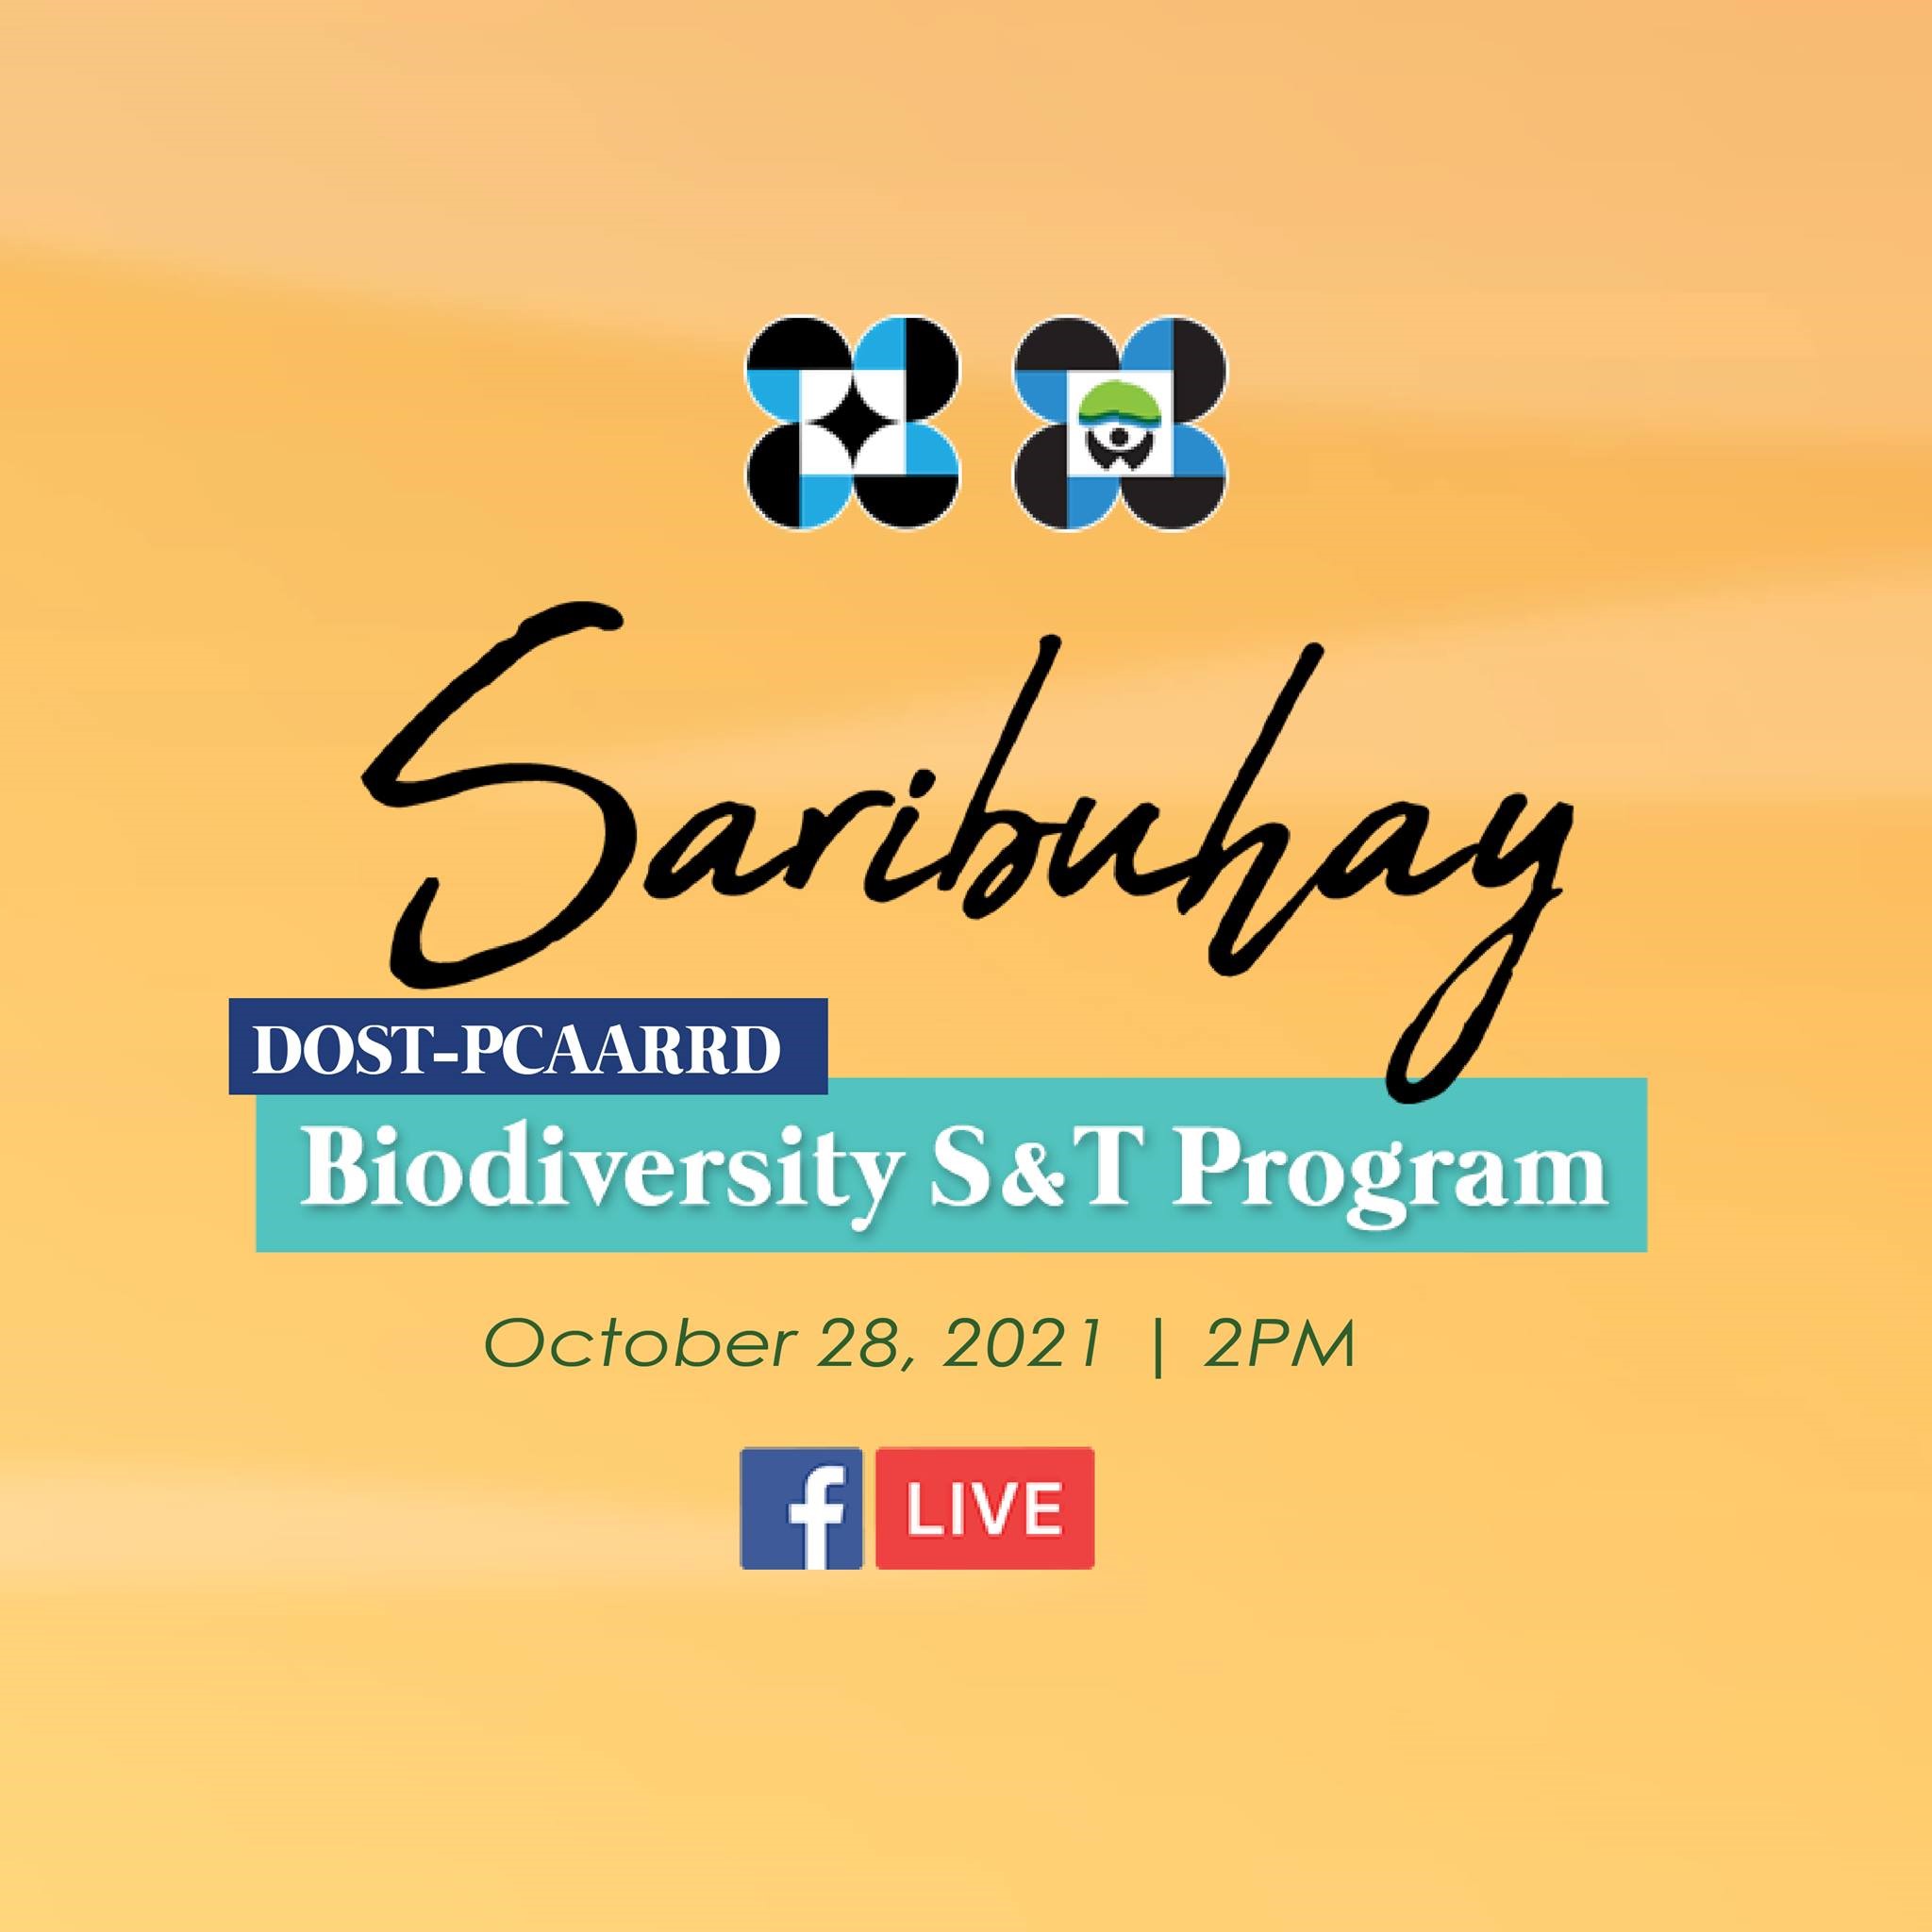 DOST banners biodiversity programs and the Saribuhay docuseries to the public image